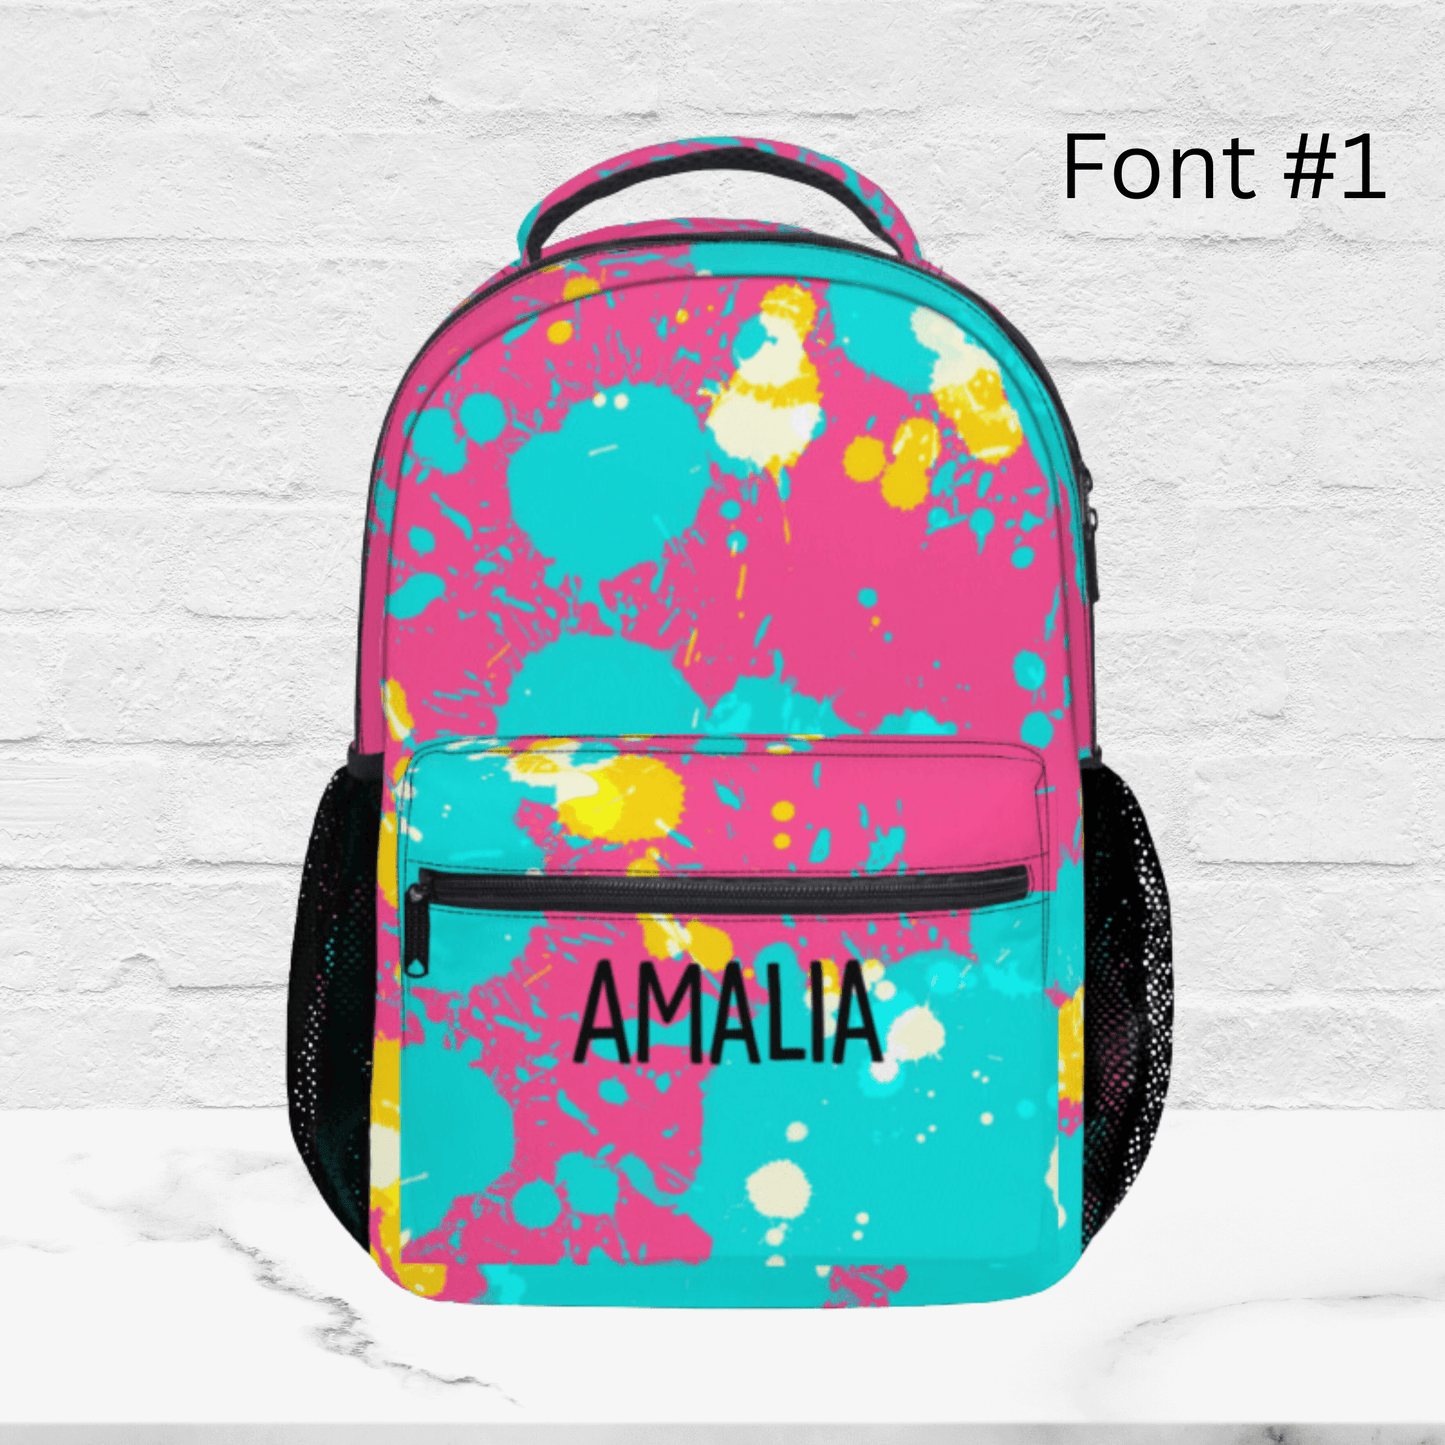 Our custom pink splatter backpack for kids shown with font one. This colorful backpack is sure to please the picky kid.